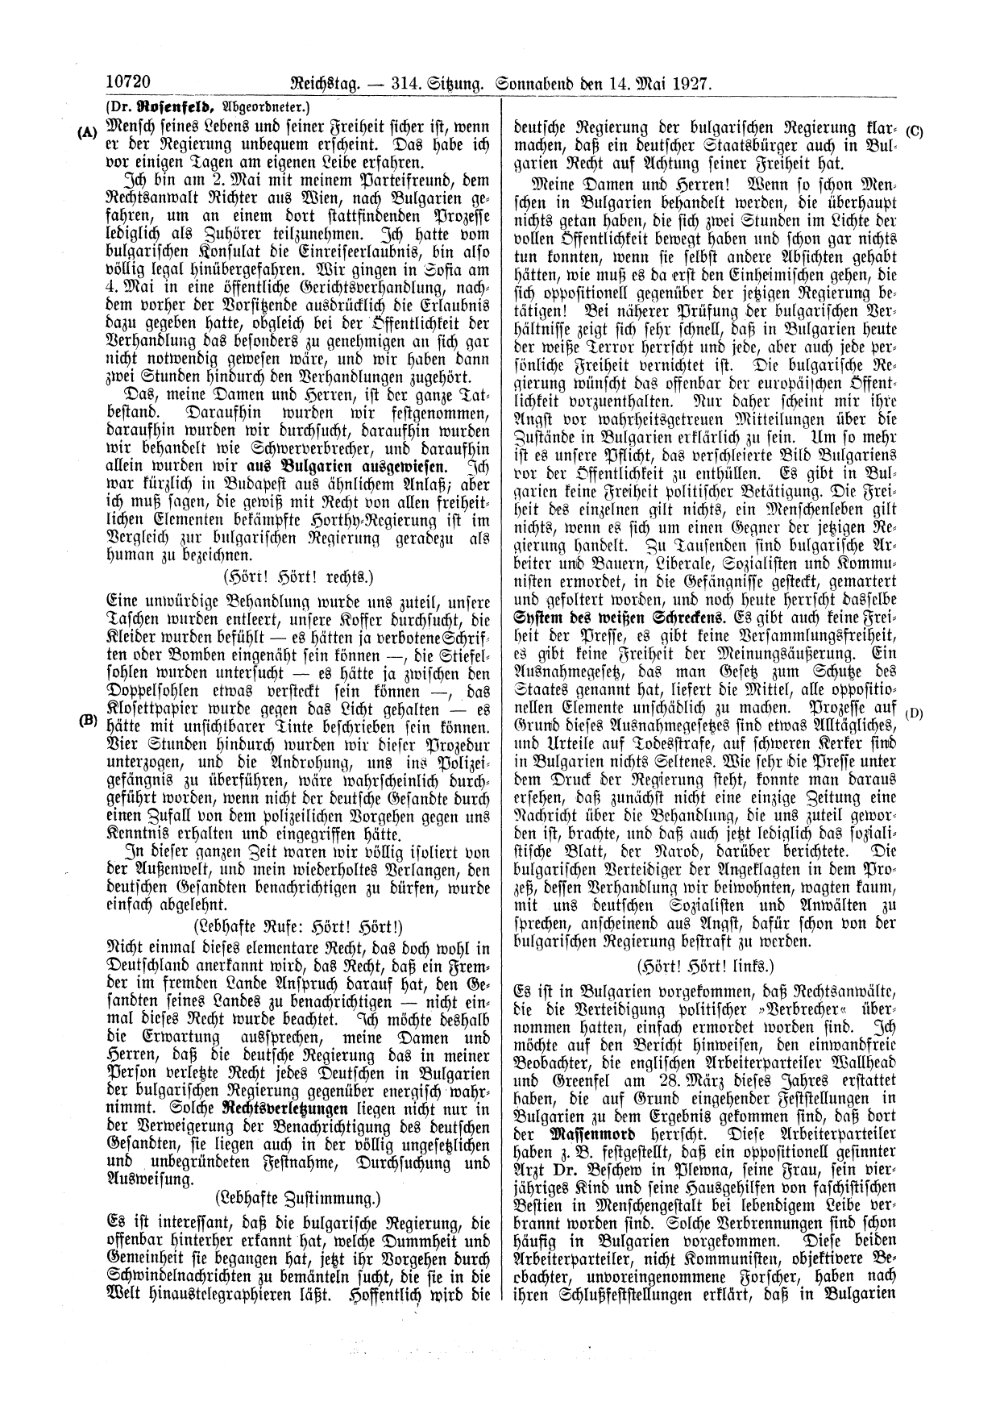 Scan of page 10720